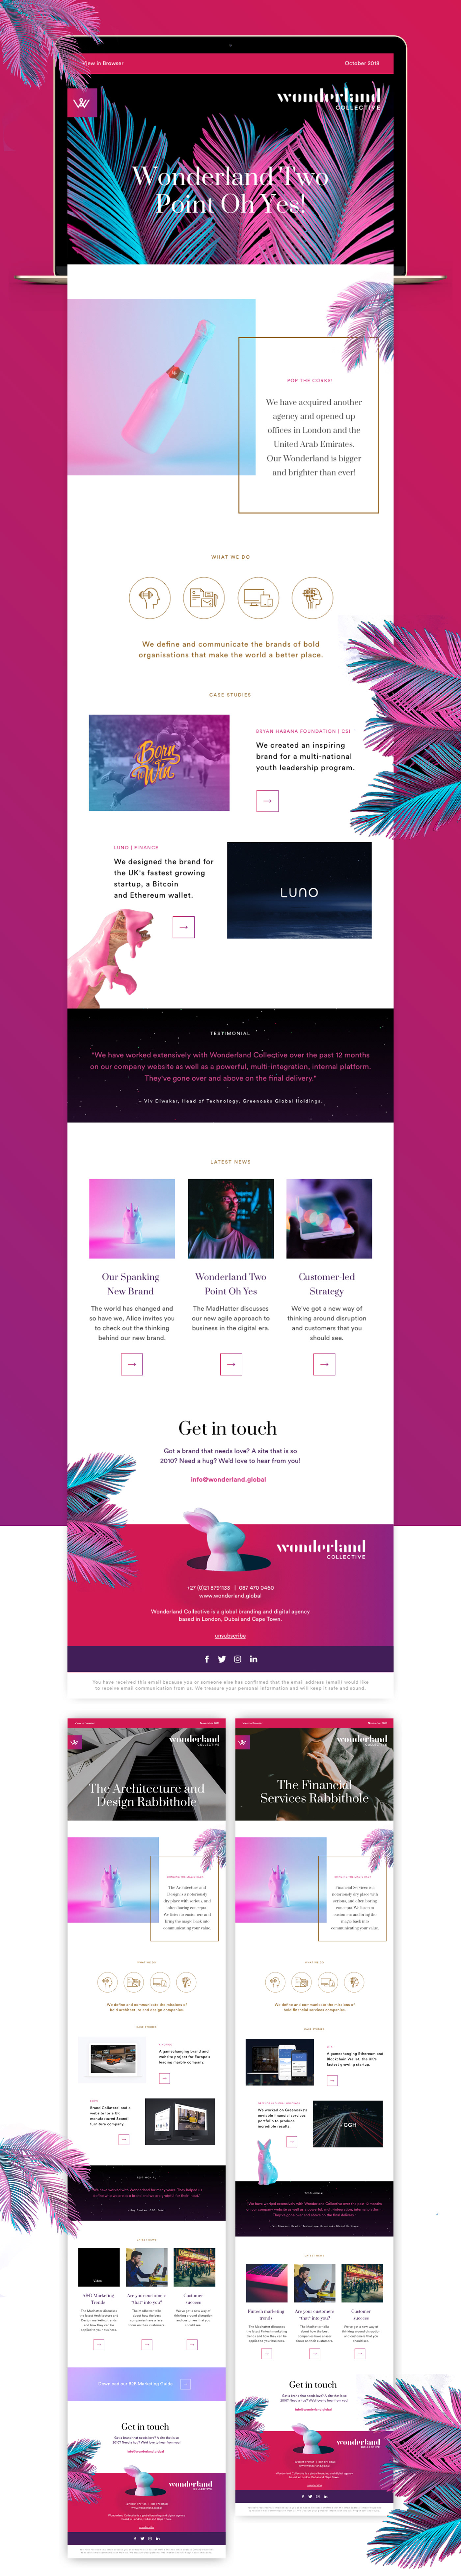 mailer newsletter Email Mail template enewsletter Emailer mailer design email template digital design agency  mailer